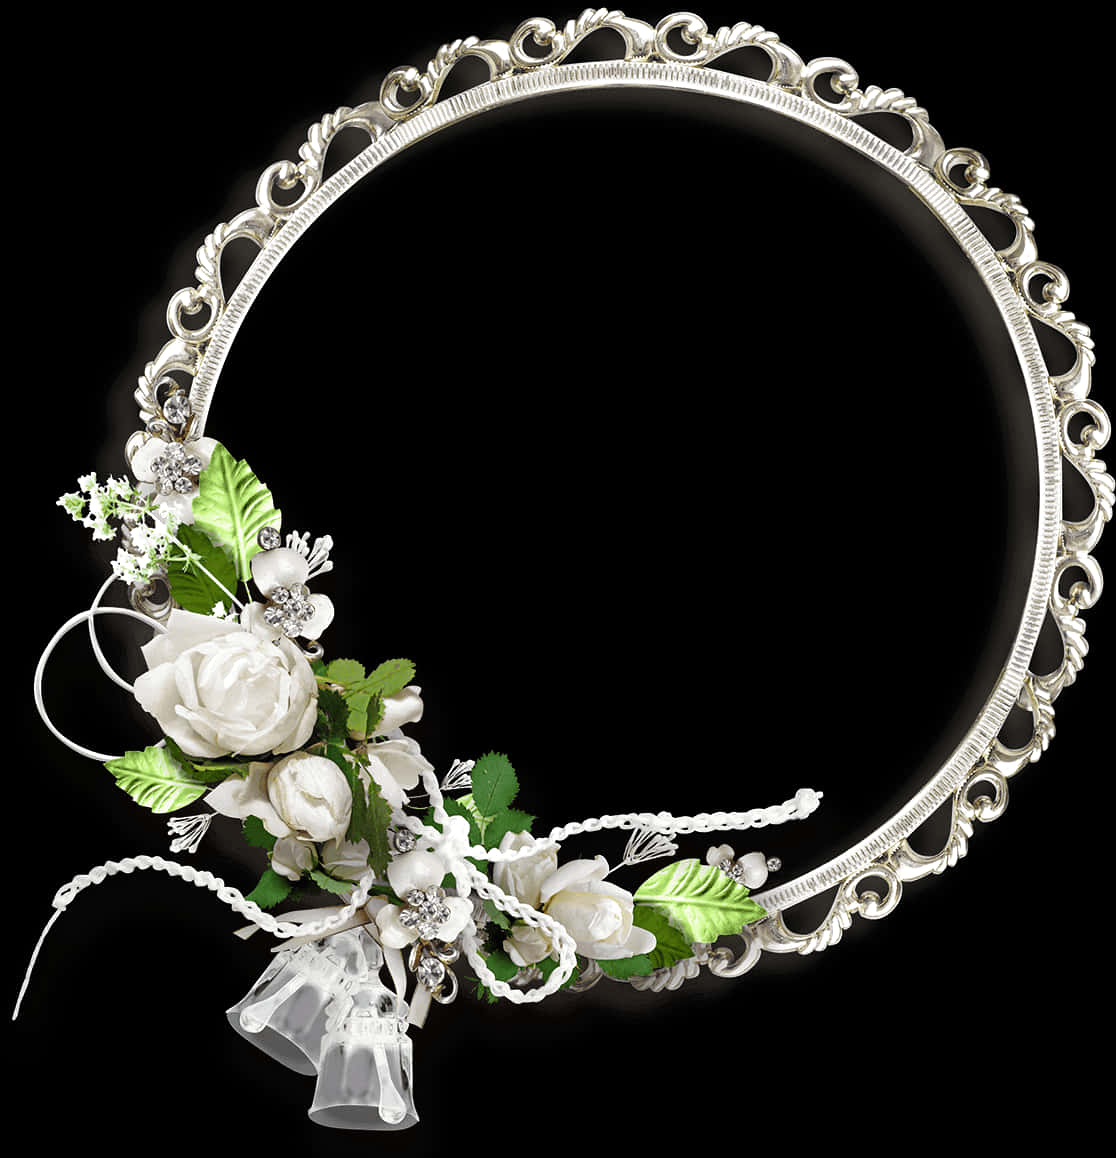 A Round Silver Frame With White Flowers And Bells